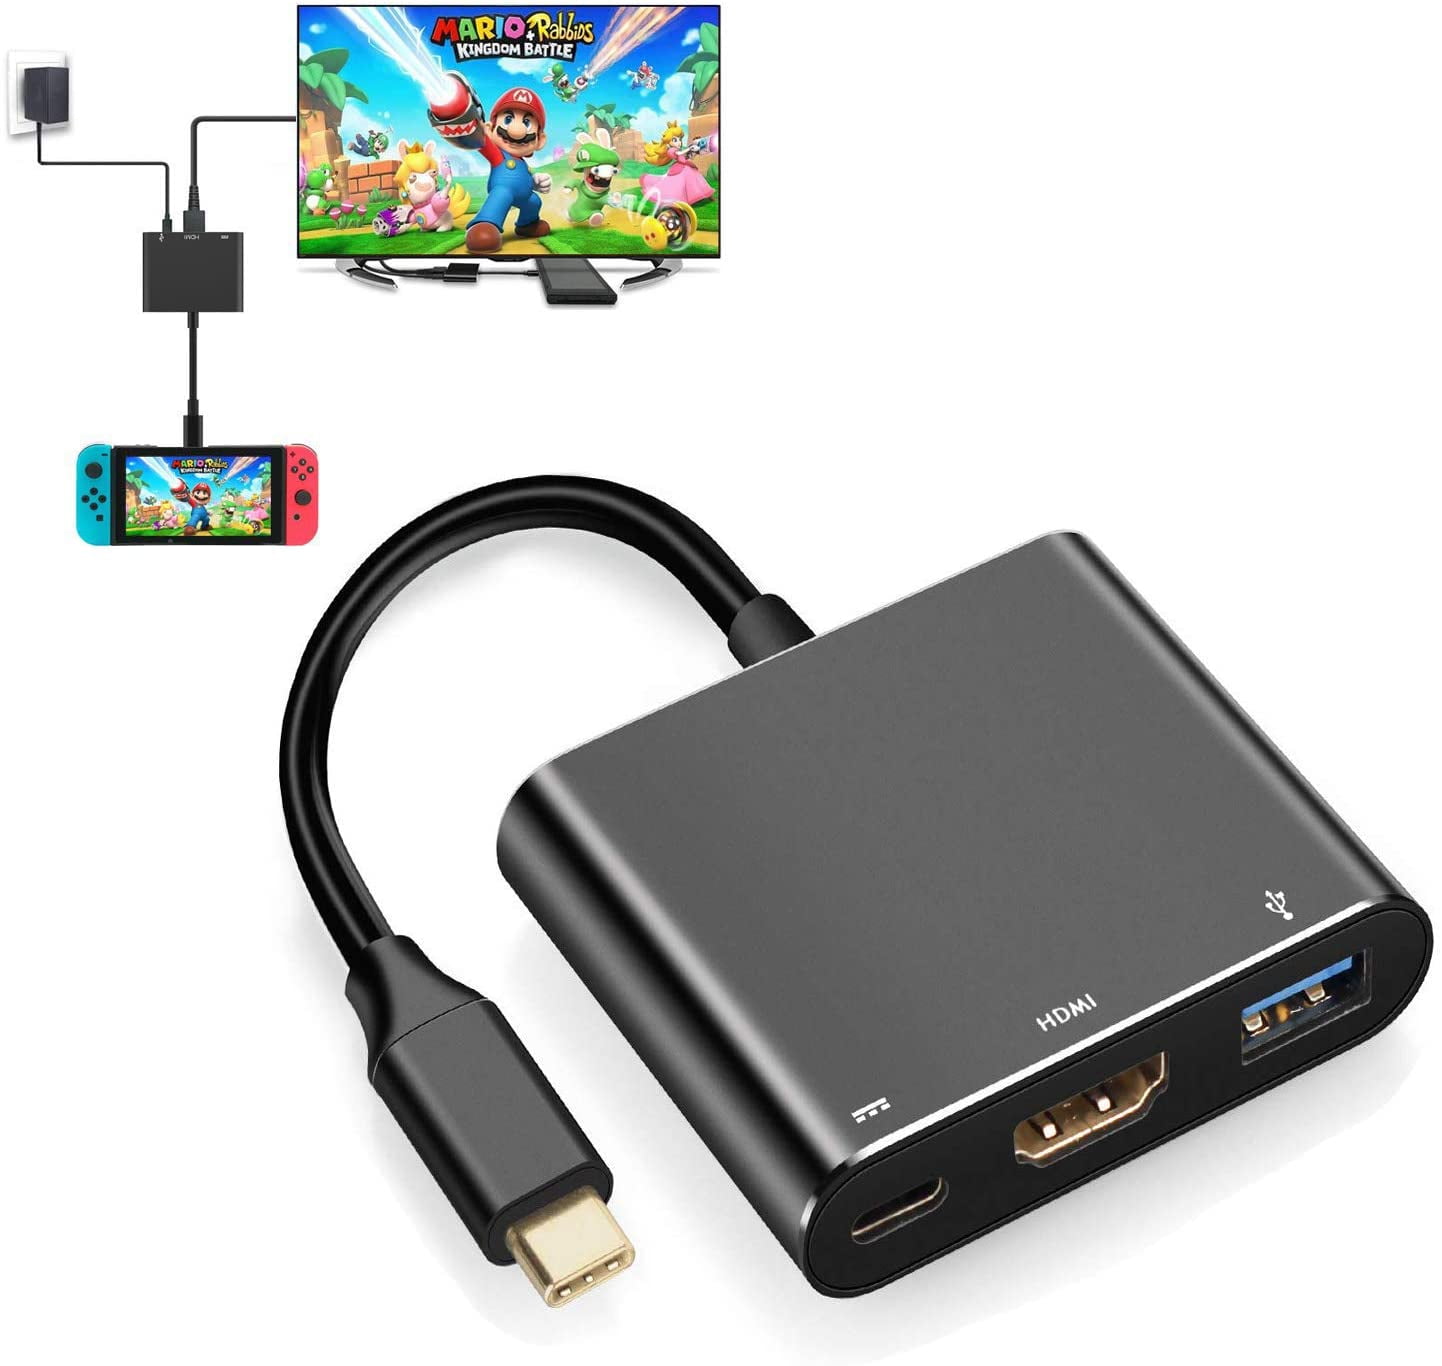 HDMI Adapter Nintendo Switch, Charging Cable Switch Hdmi Adapter Any Type C Device Hub Adapter Nintendo Switch - Walmart.com